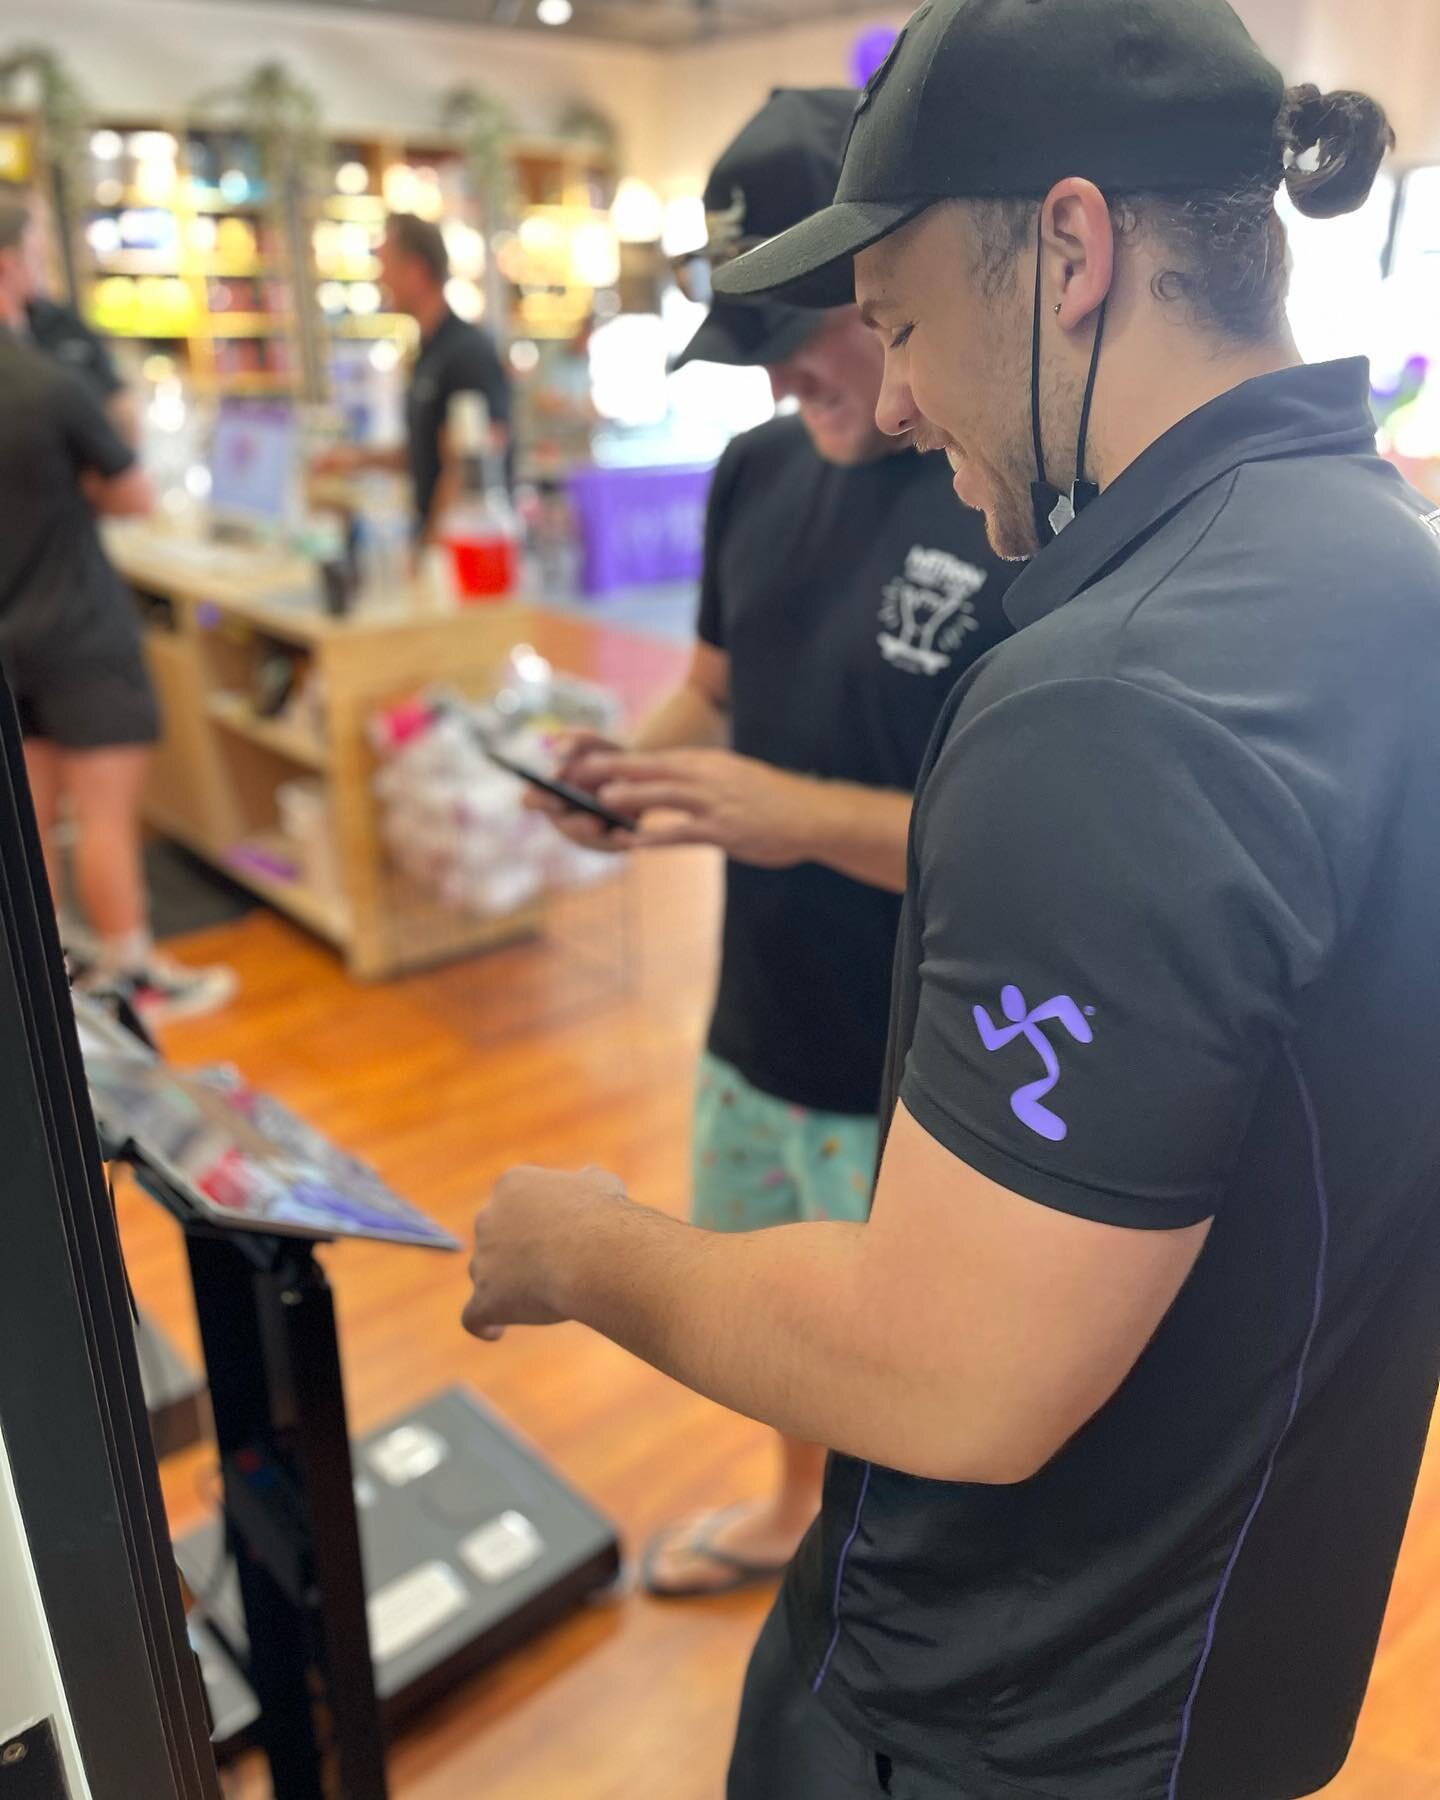 Coach Connor was smashing out Evolt360 Scans at the Grand Opening for Elite Supps Albury today

#Albury and #Wodonga folks have until 4pm today and between 10am-2pm tomorrow (Sunday) to take advantage of 25% off plus other exciting giveaways and priz